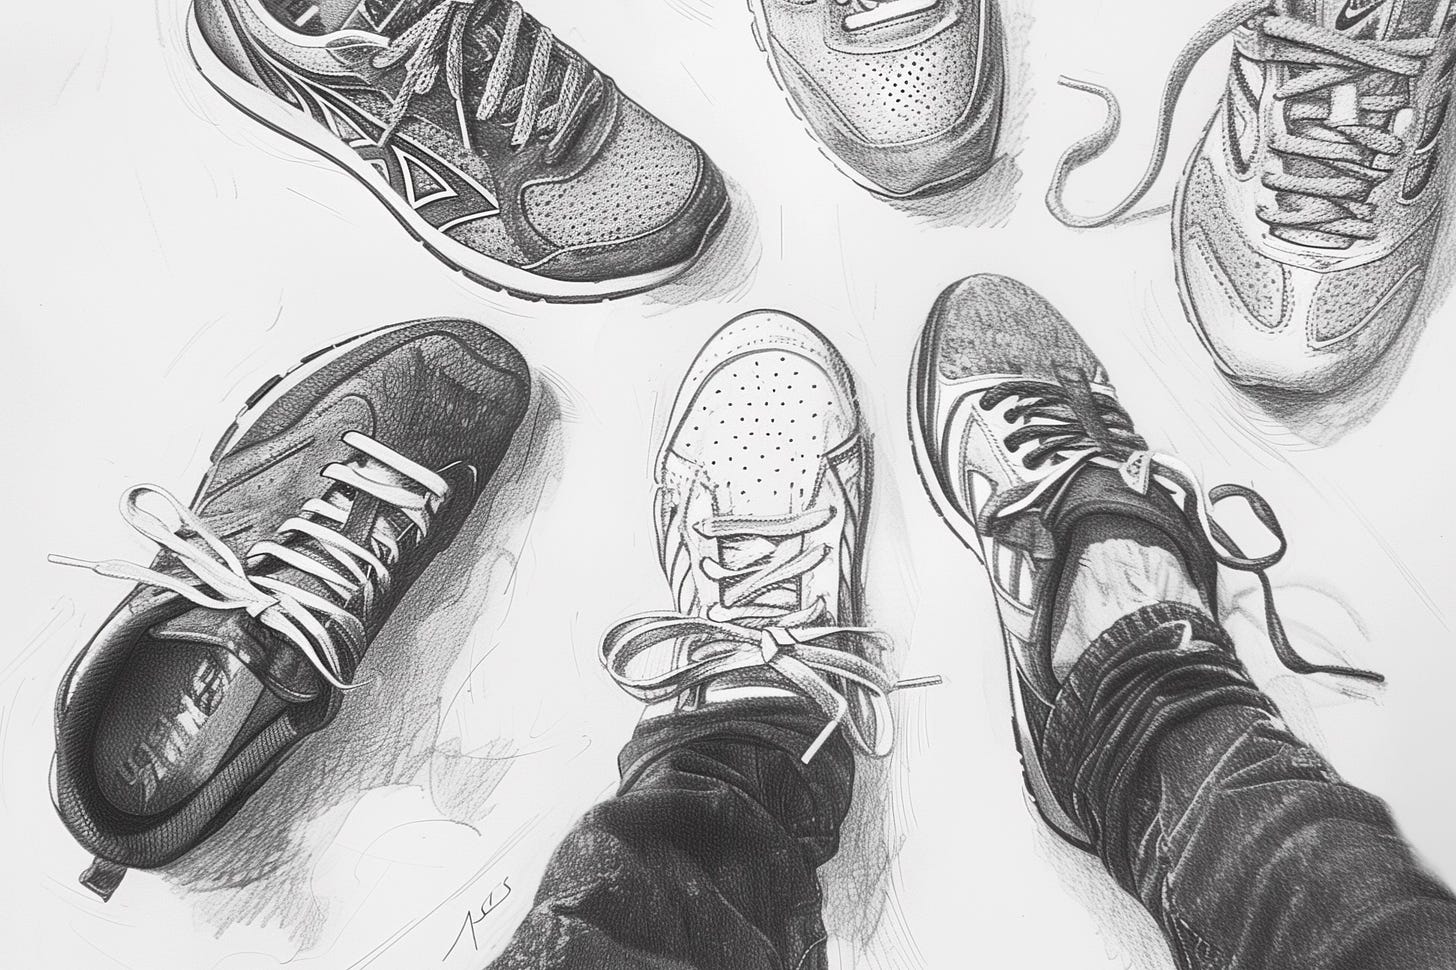 Pencil sketch image of a person’s point of view looking down at multiple running shoes.